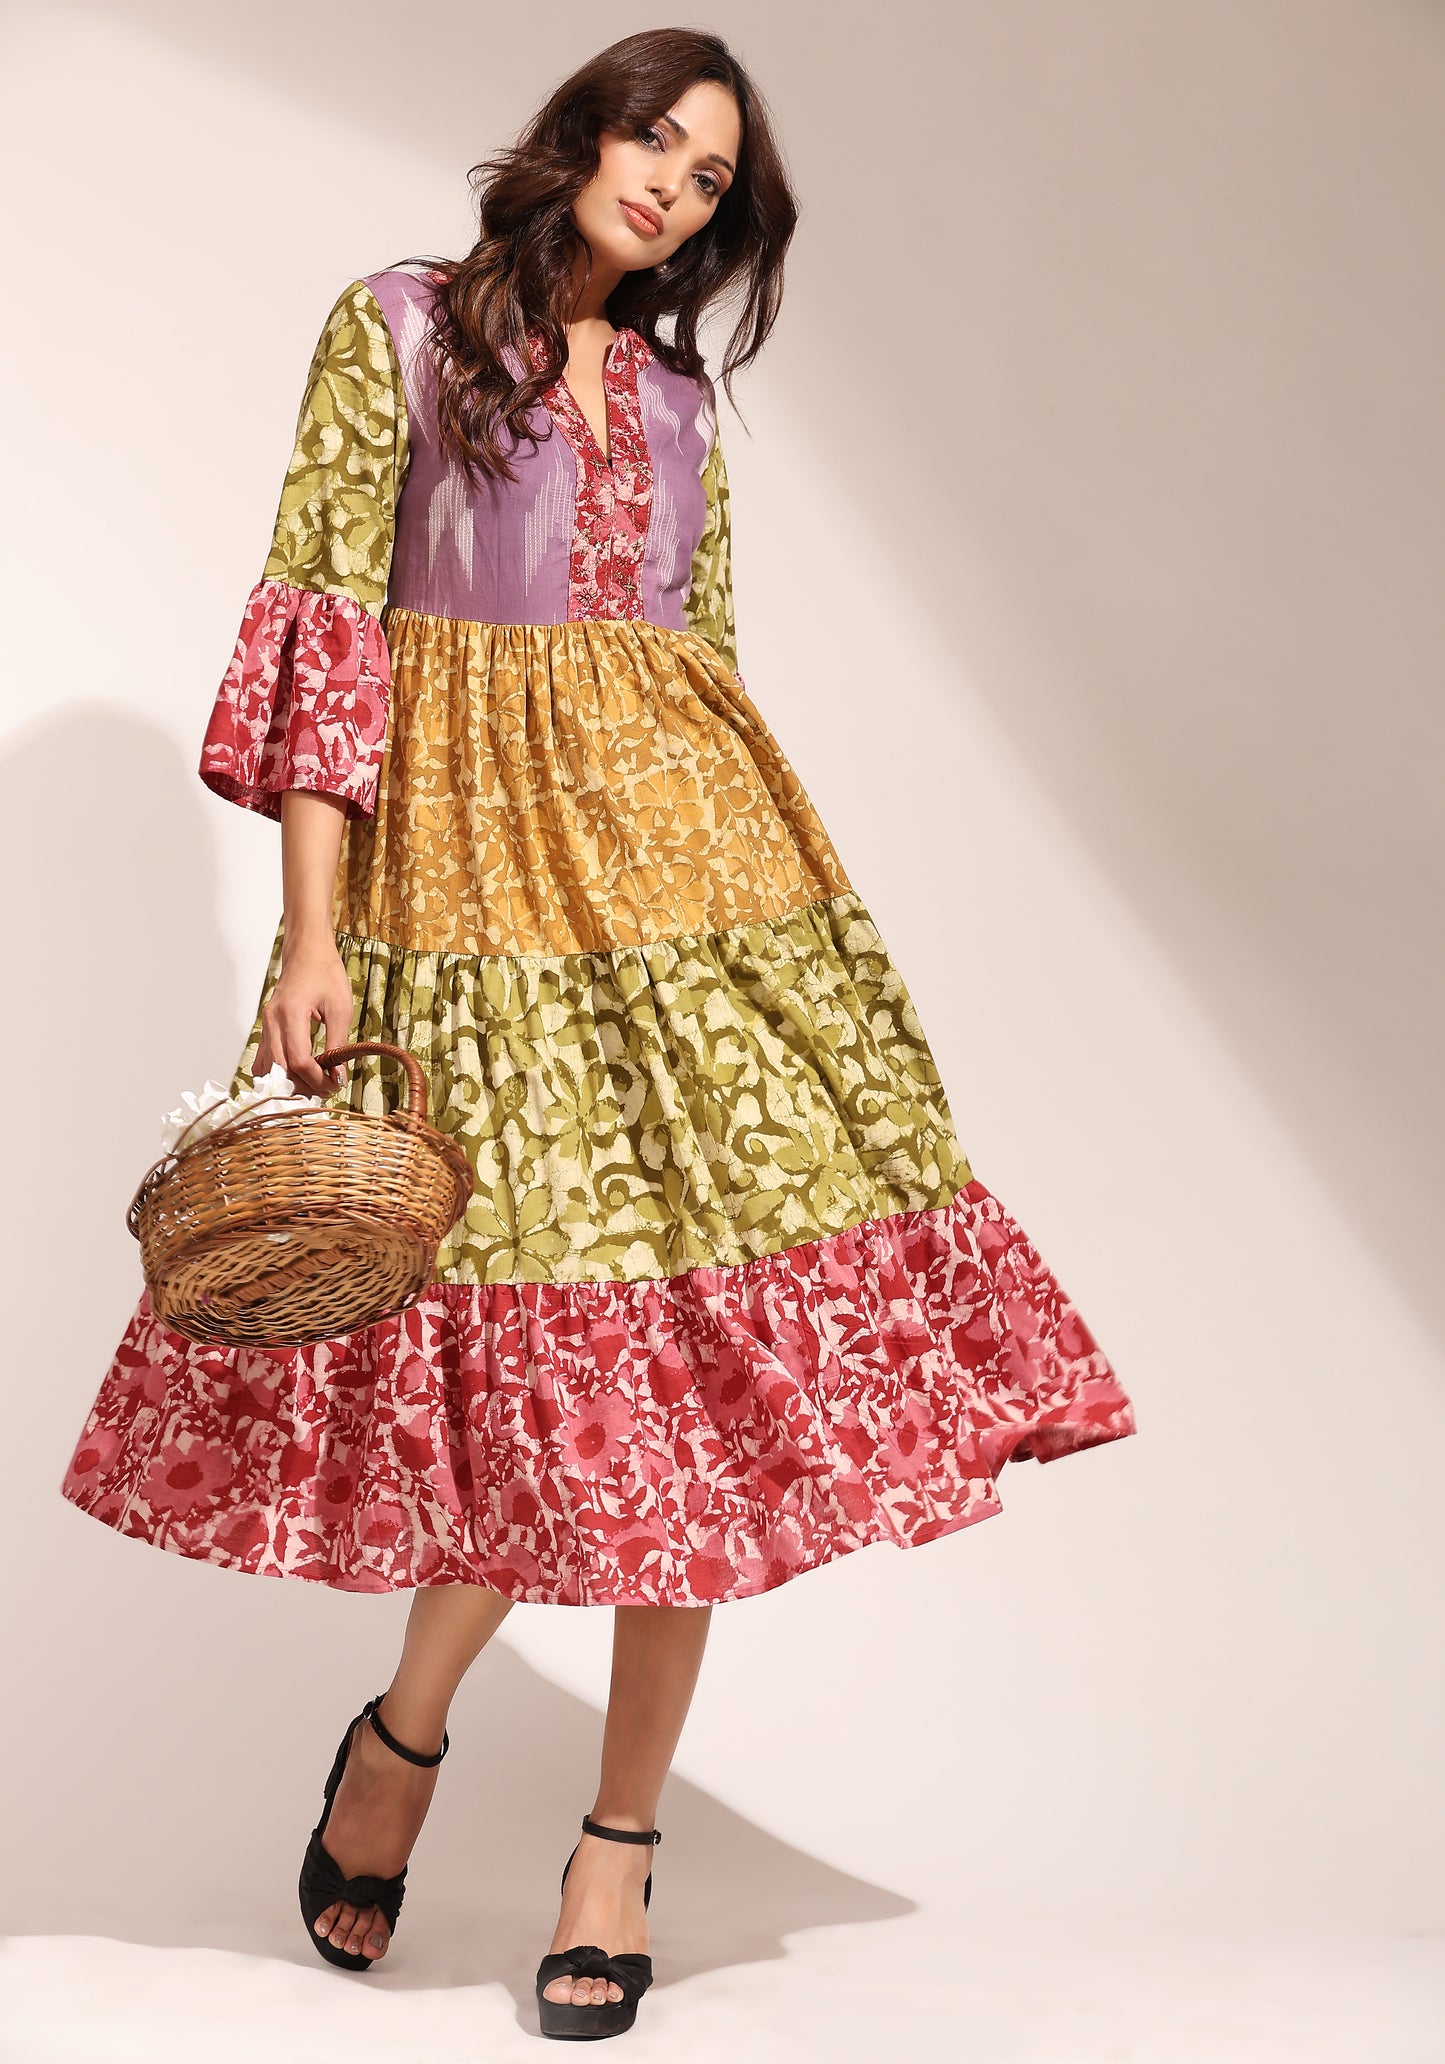 Moons and Stars Embroidery Batik Tiered Dress - Candy